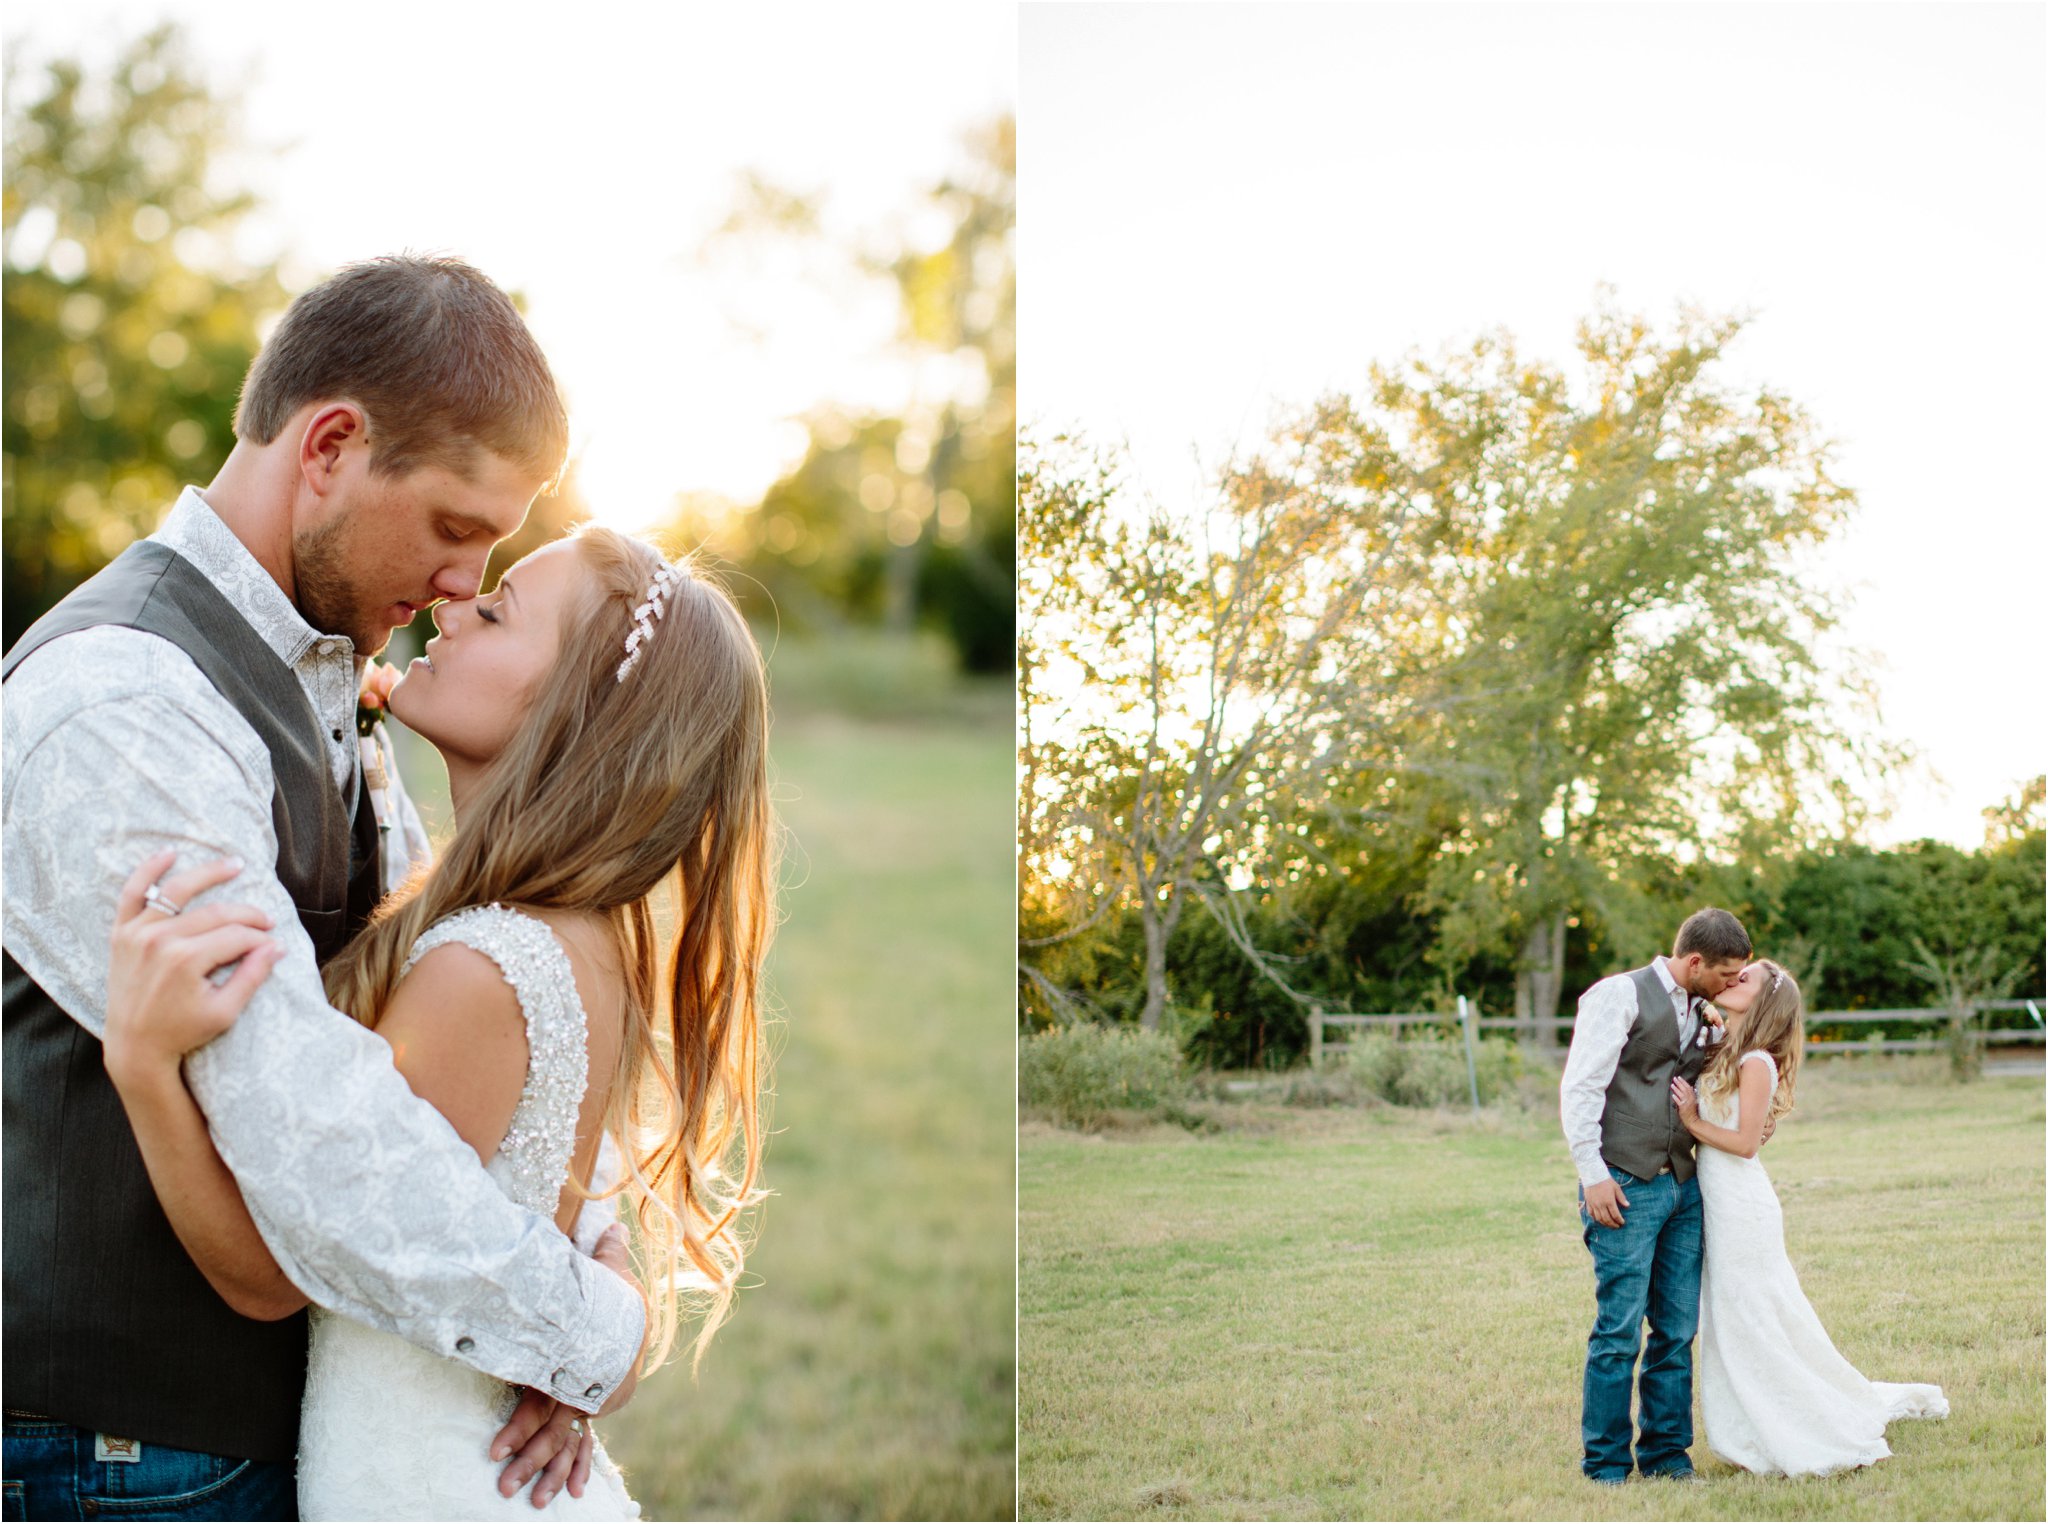 View More: http://tuckerimages.pass.us/jannisewedding